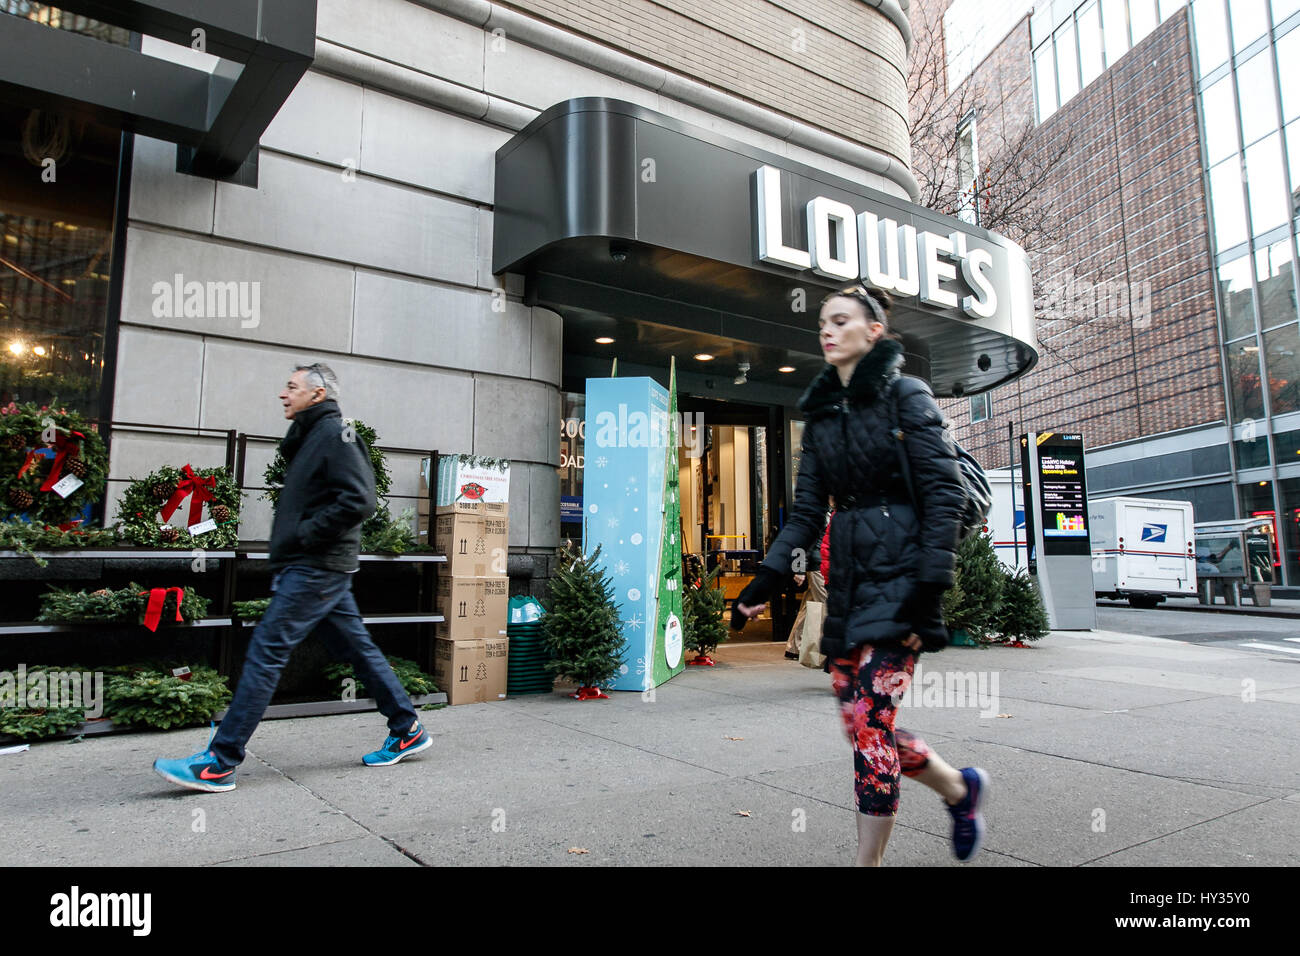 New York, November 28, 2016: People walk by the entrance to a Lowe's home improvement store on Upper West Side. Stock Photo